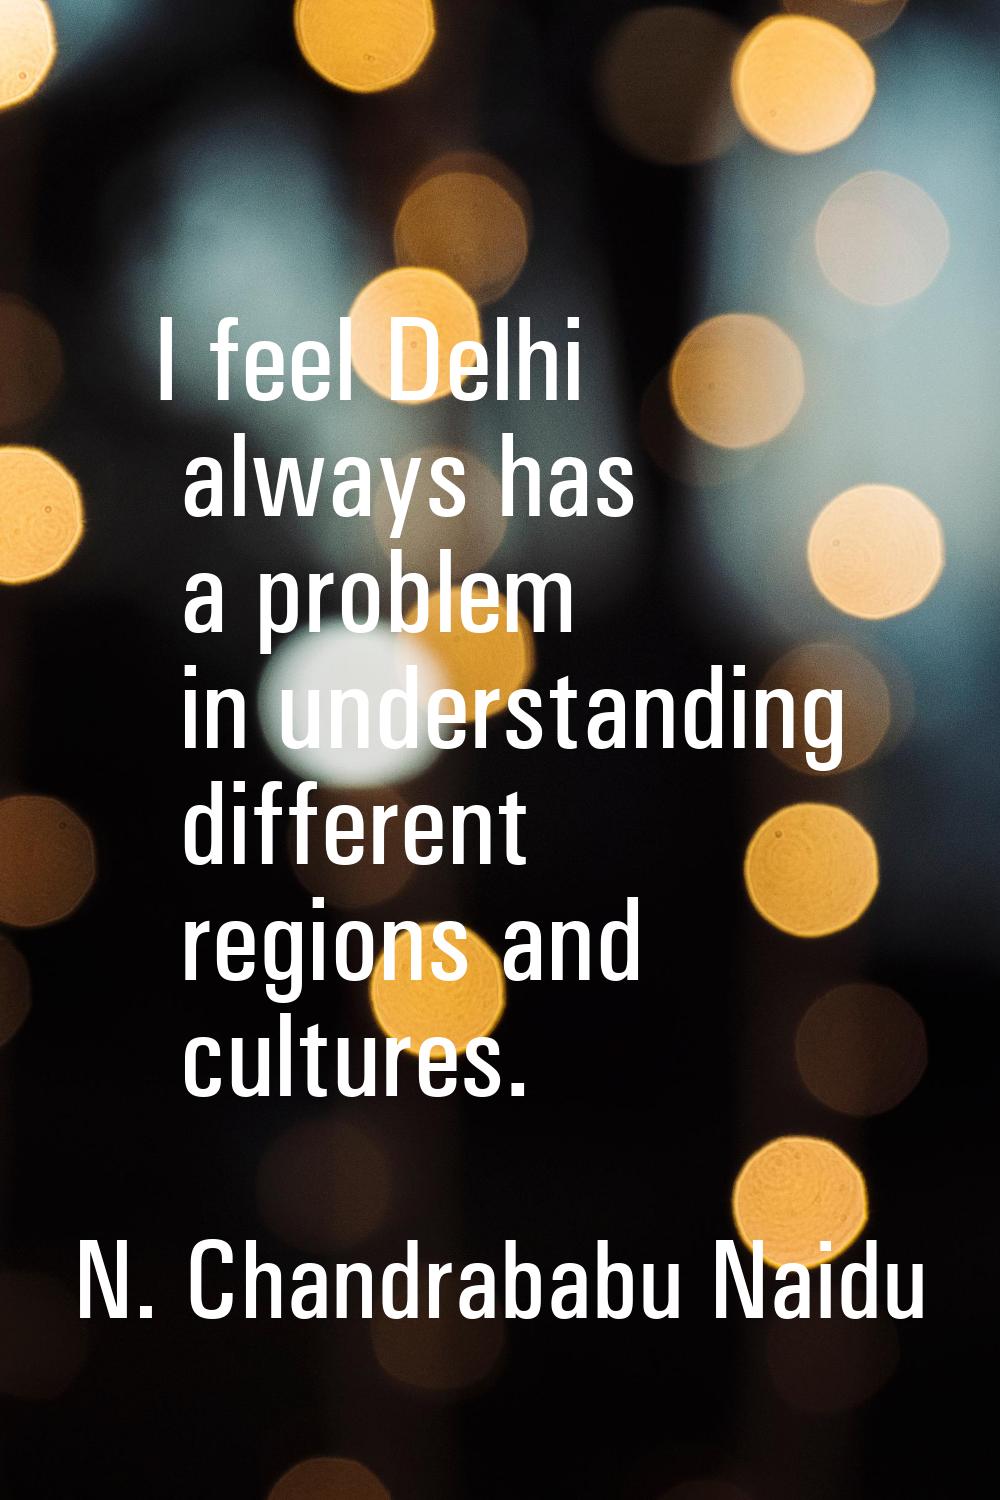 I feel Delhi always has a problem in understanding different regions and cultures.